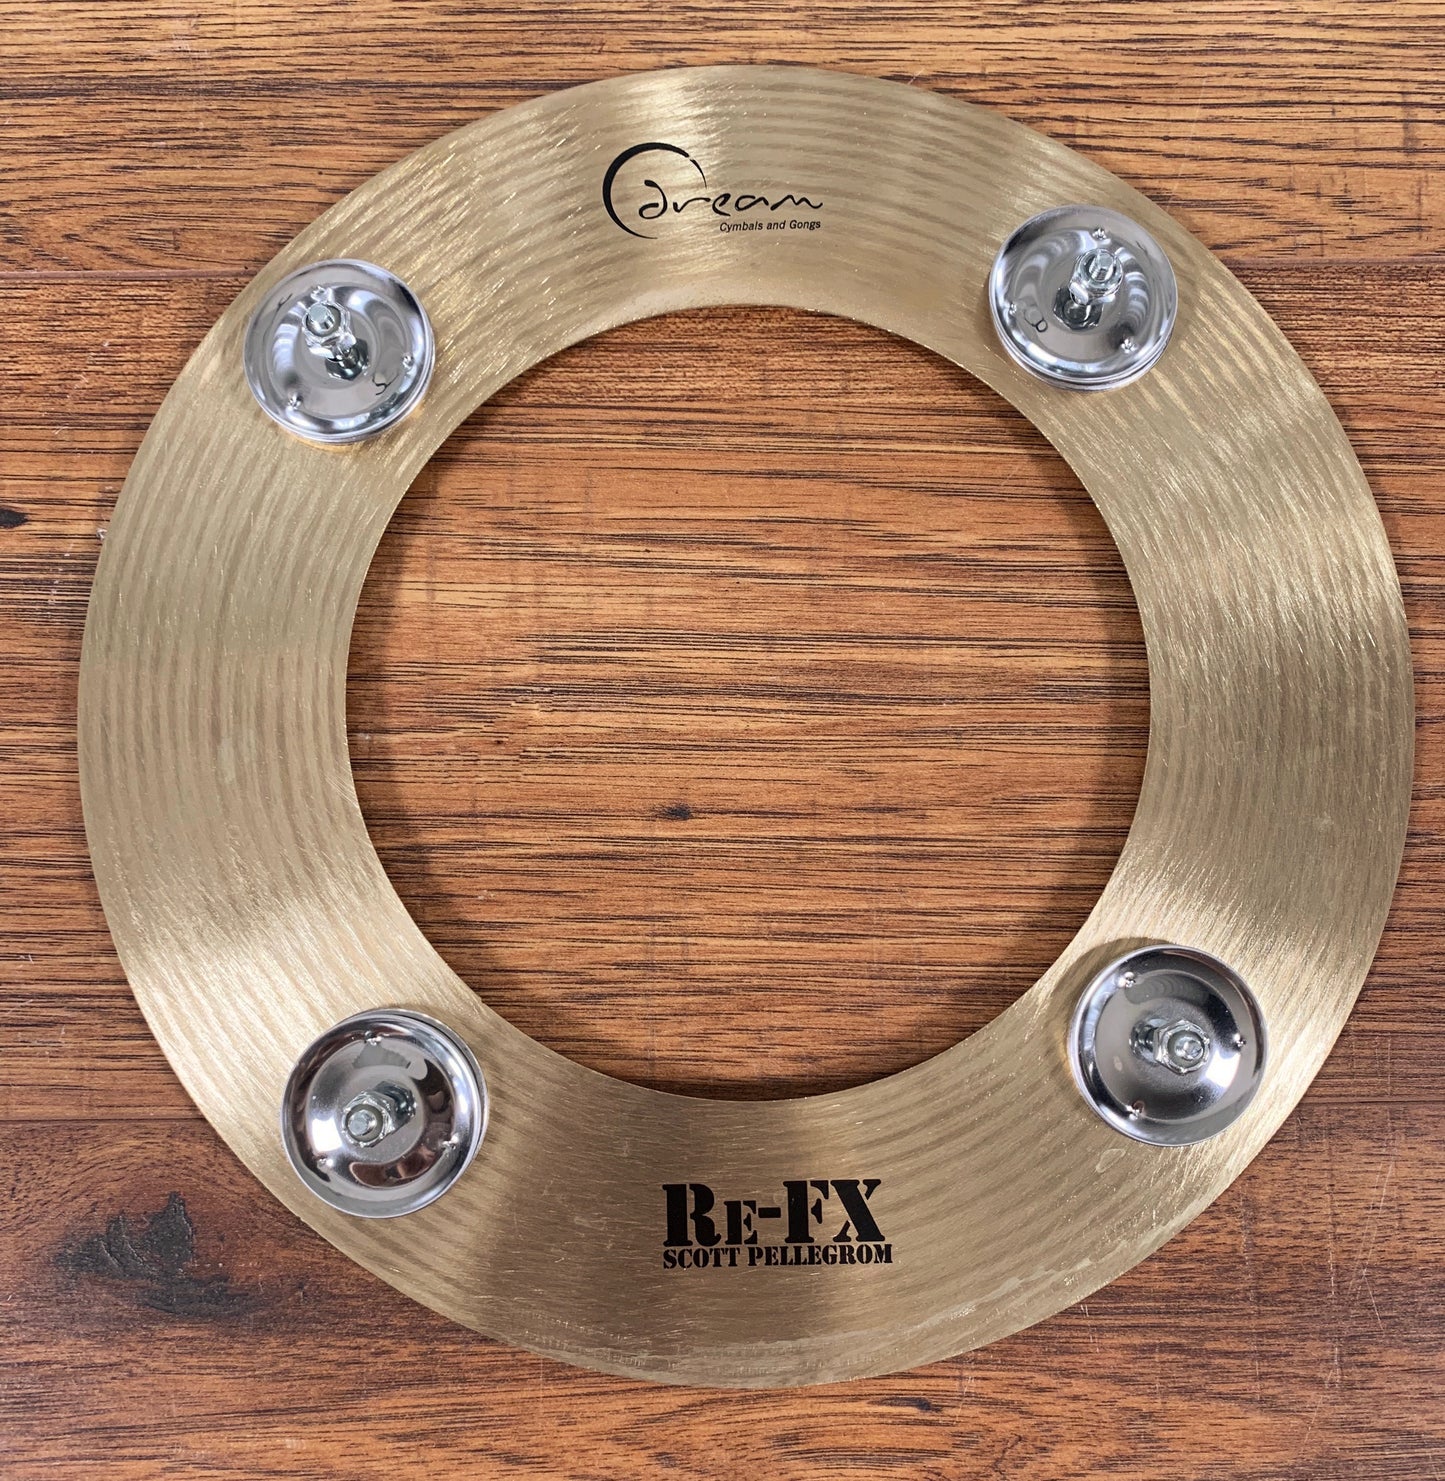 Dream Cymbals REFX-CC10 Recycled RE-FX Series Scott Pellegrom 10" Crop Circle with Jingles